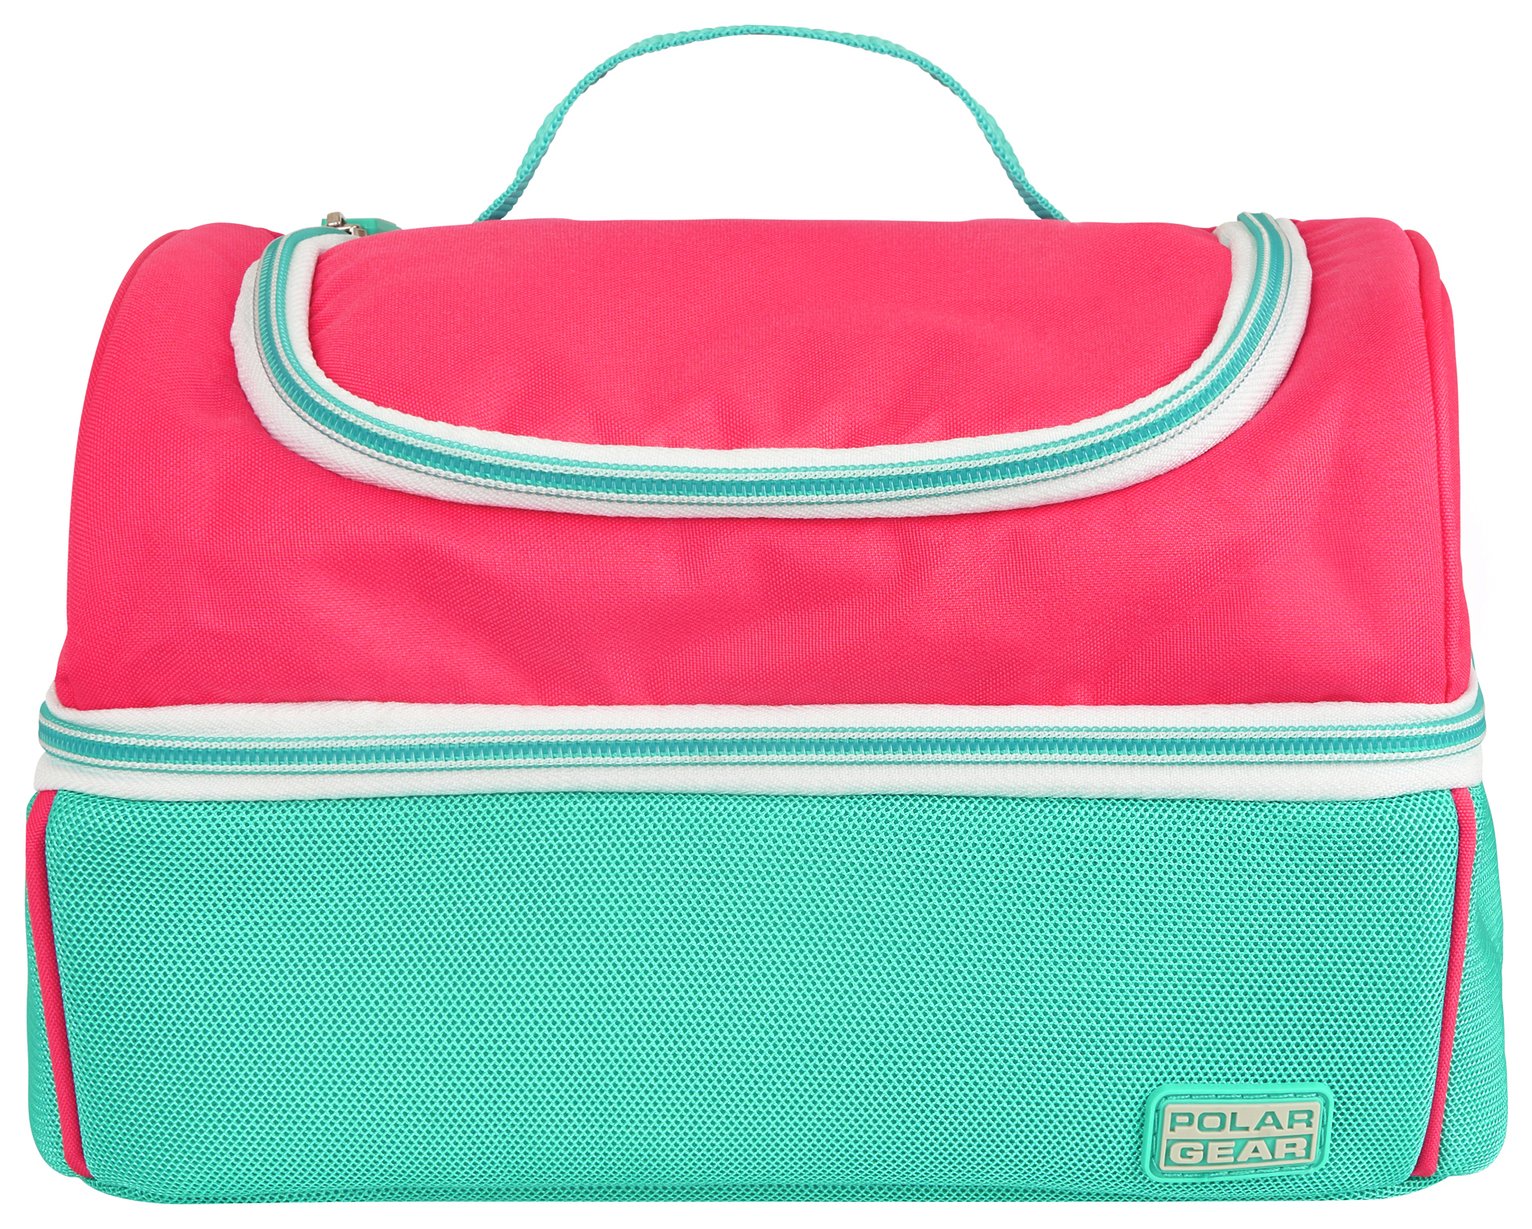 Polar Gear Compartment Lunch Bag - Pink